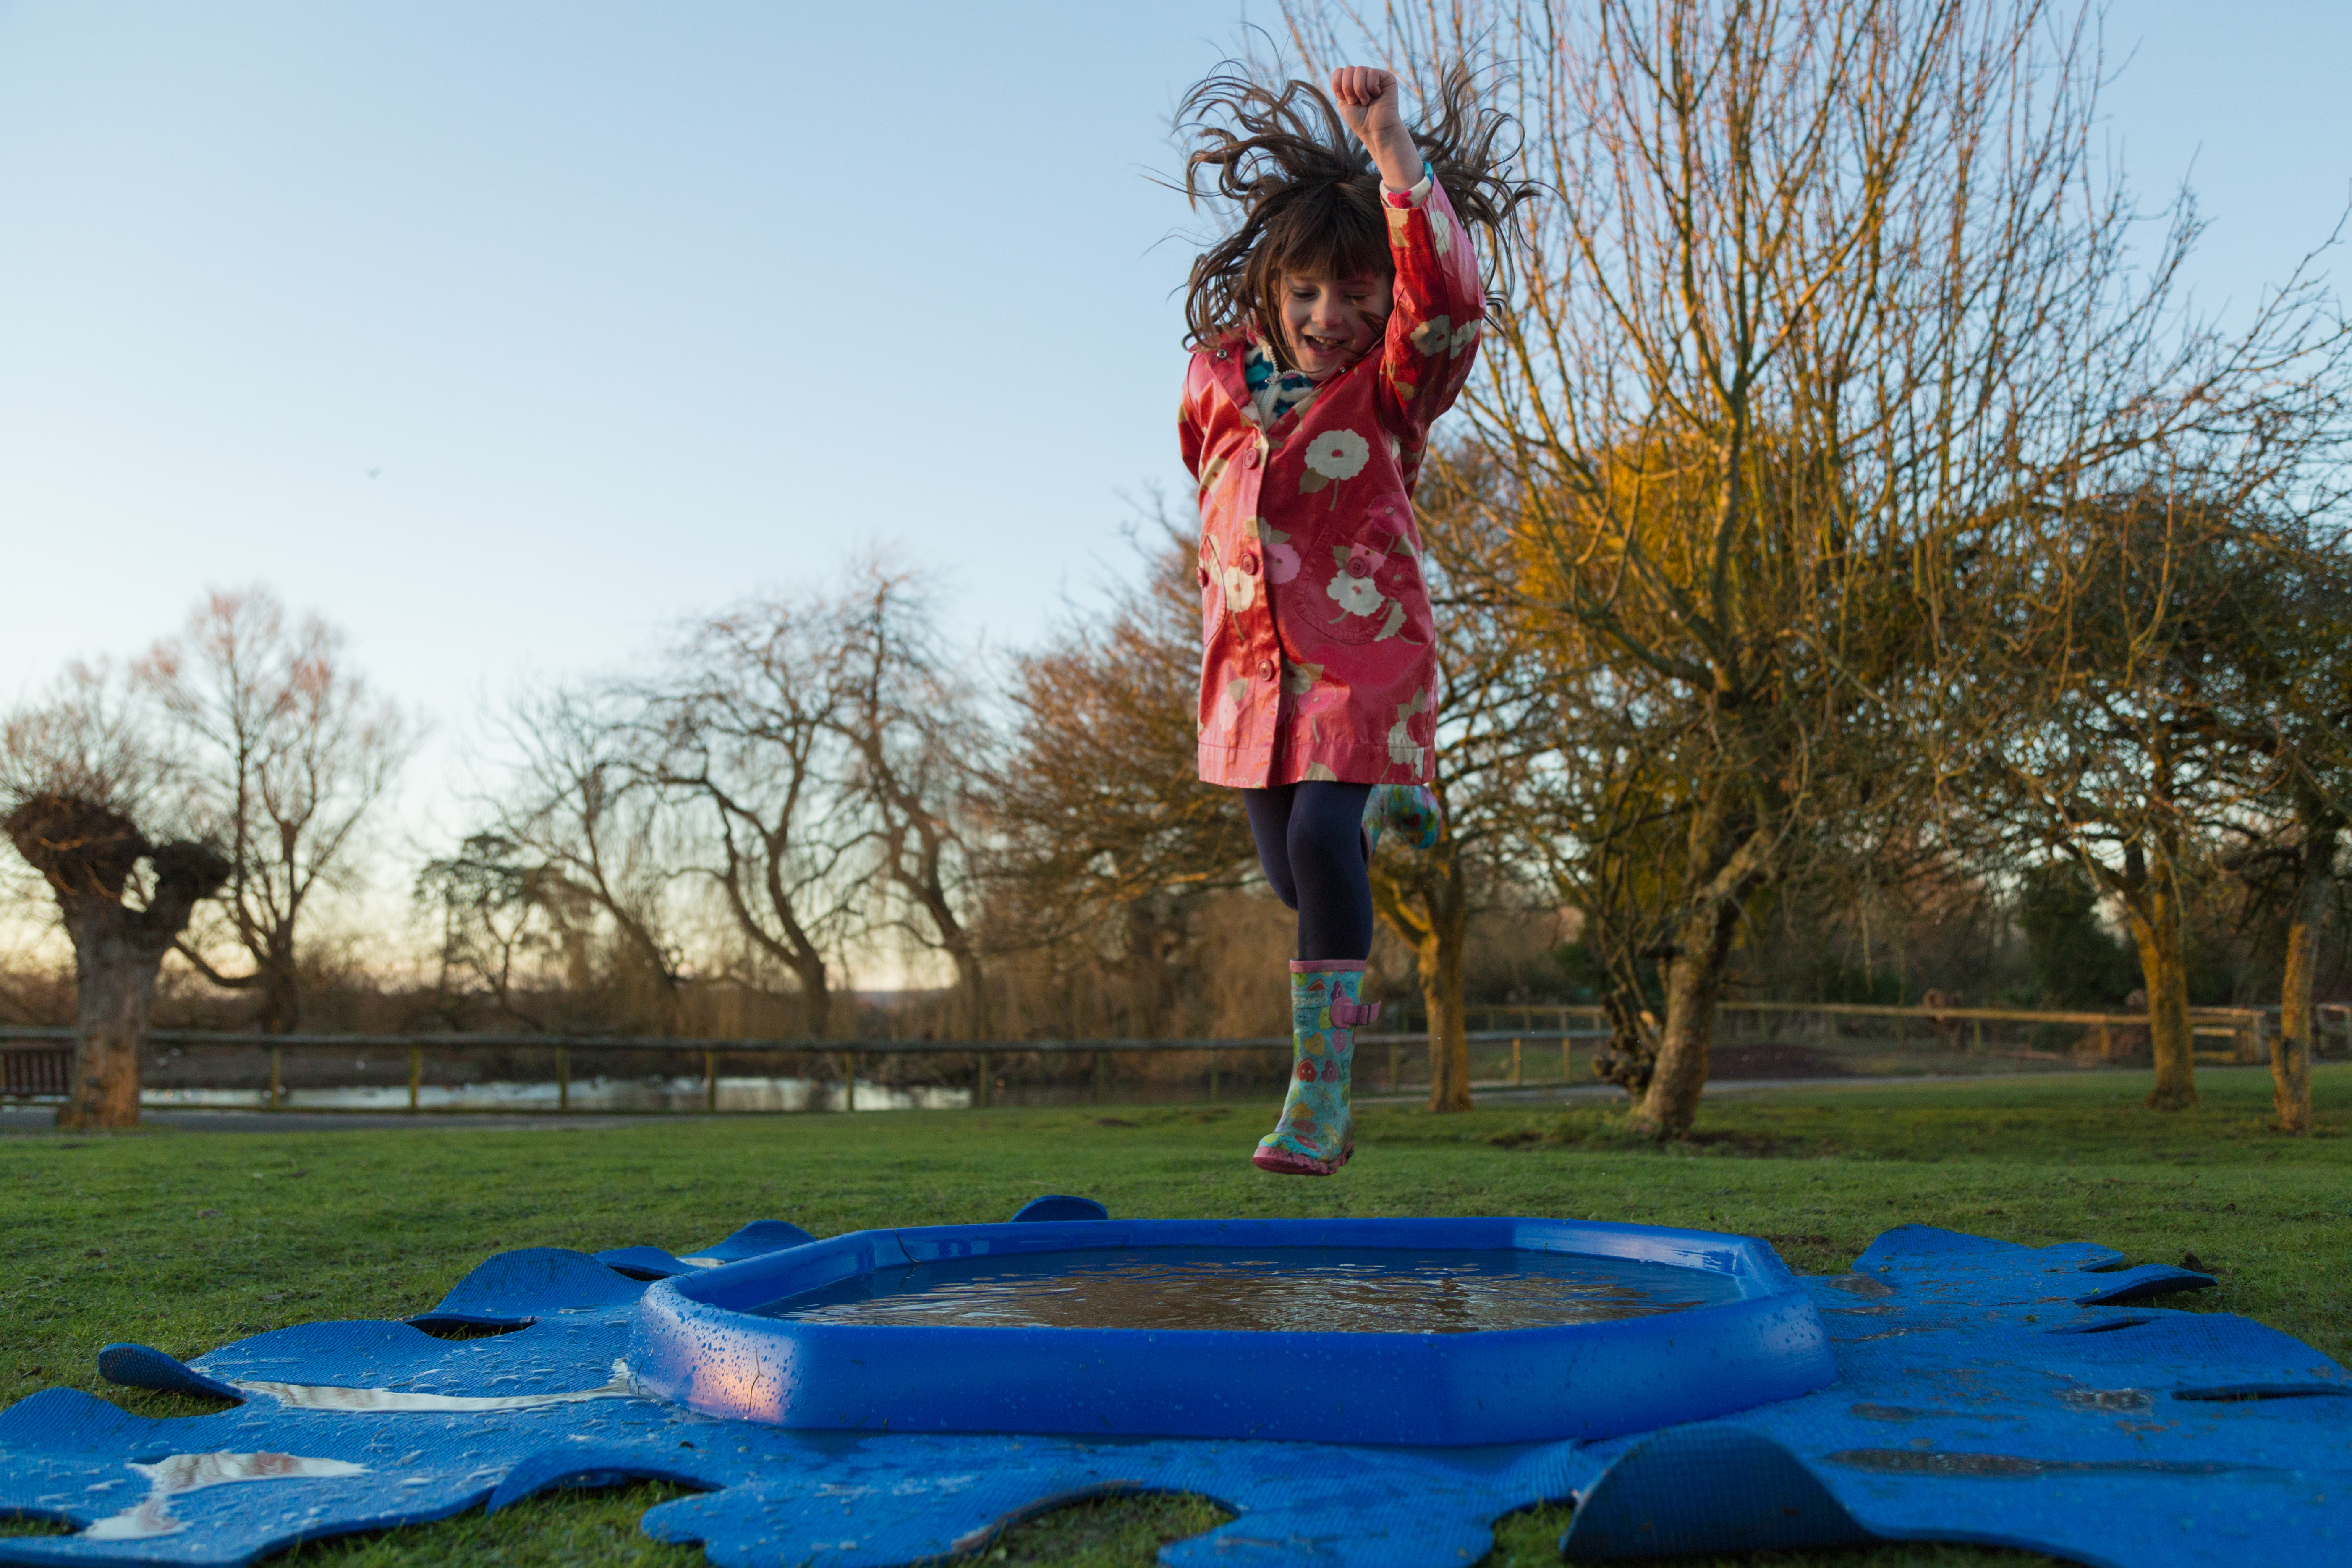 Make a Splash at WWT’s 2020 Puddle Jumping Championships  This February Half Term 